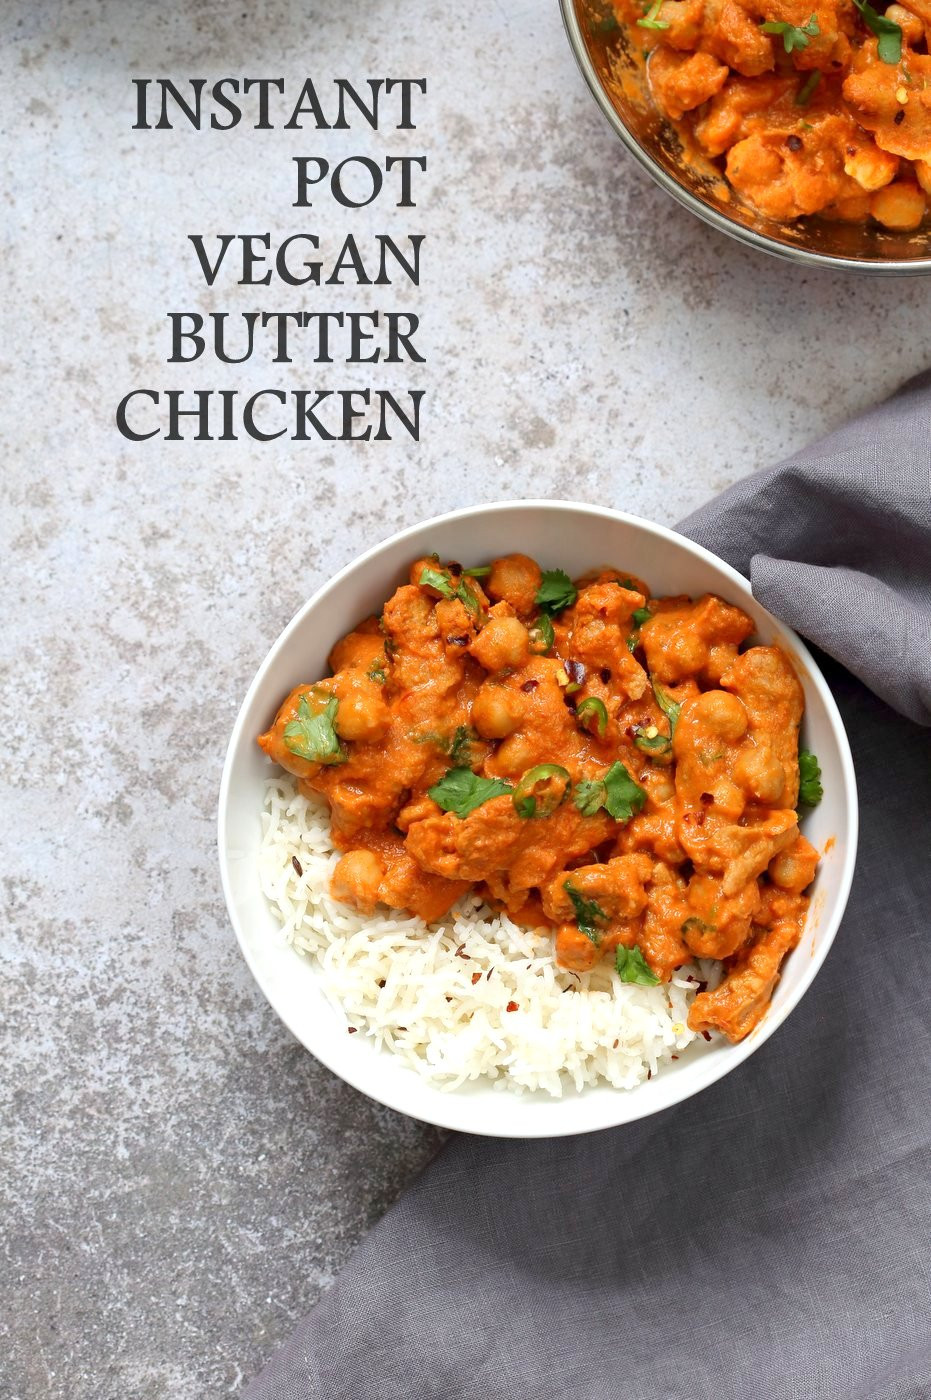 Vegan Soybean Recipes
 Instant Pot Vegan Butter Chicken with Soy Curls and